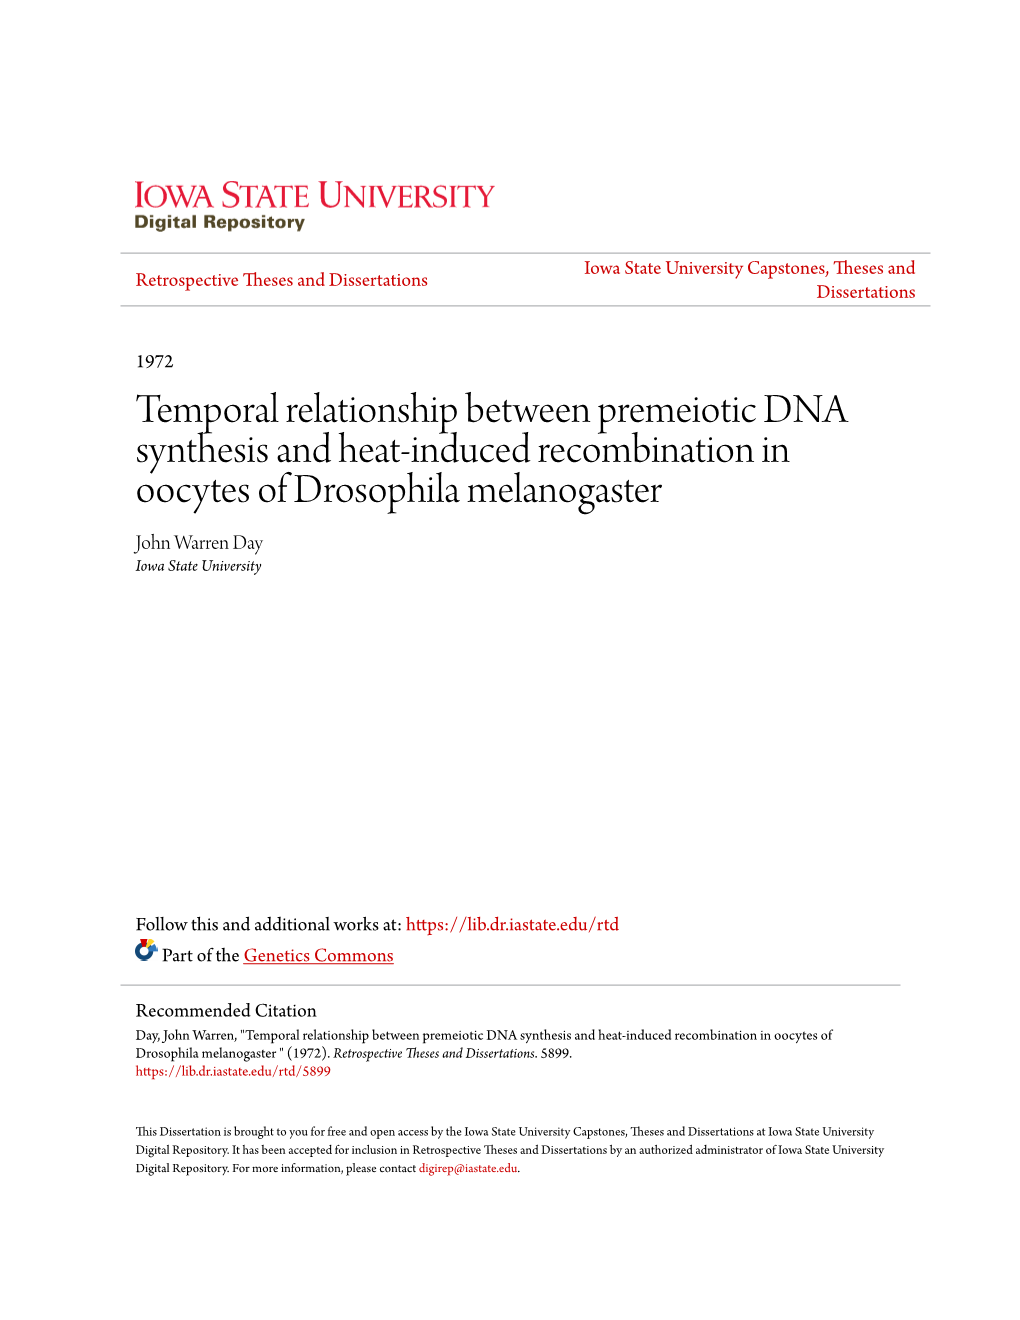 Temporal Relationship Between Premeiotic DNA Synthesis and Heat-Induced Recombination in Oocytes of Drosophila Melanogaster John Warren Day Iowa State University